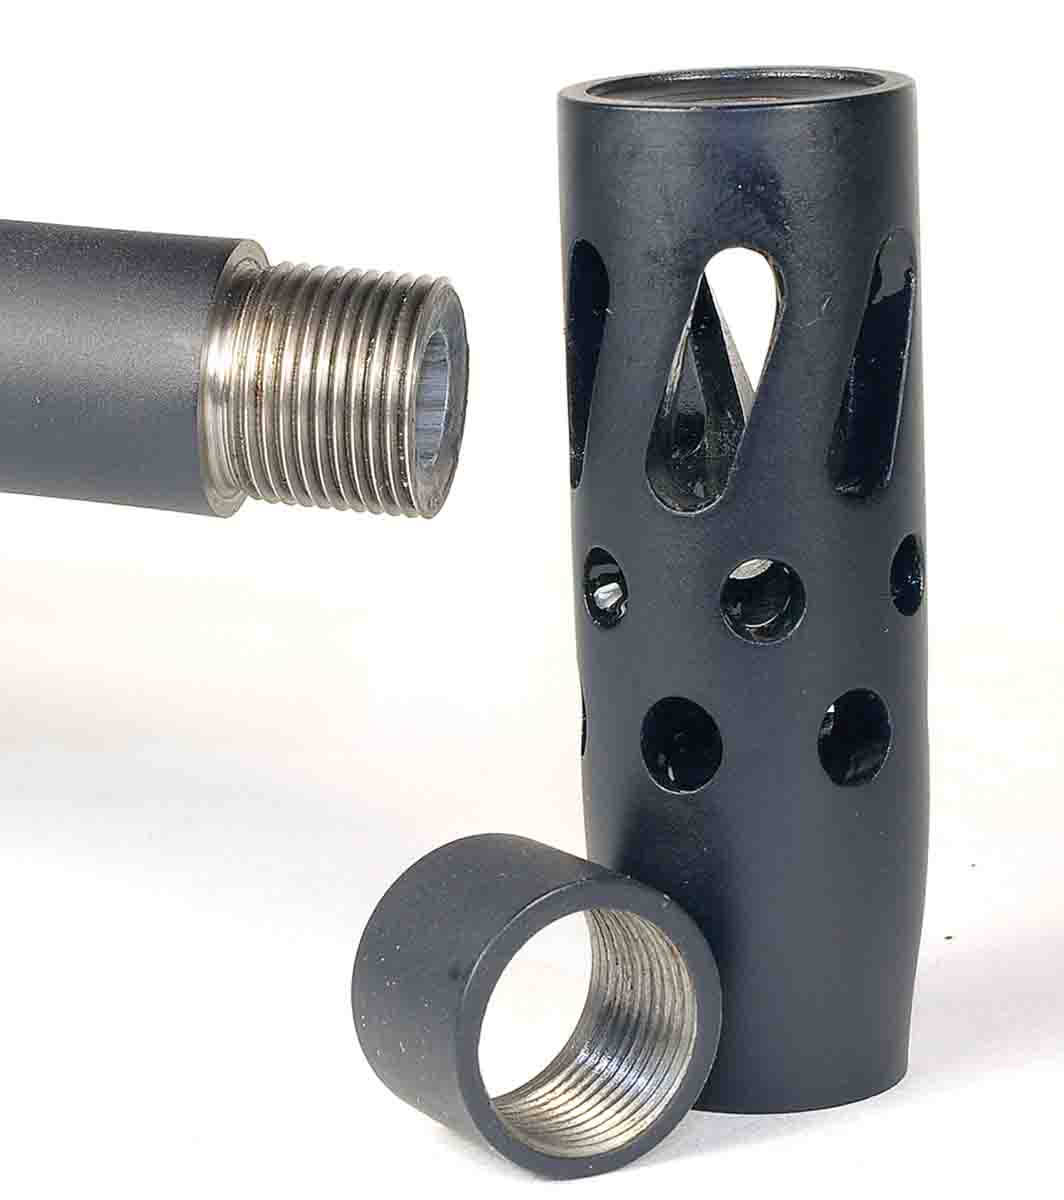 The rifle came with an optional muzzle brake; a cap hides and protects the threads on the muzzle when the brake is removed.